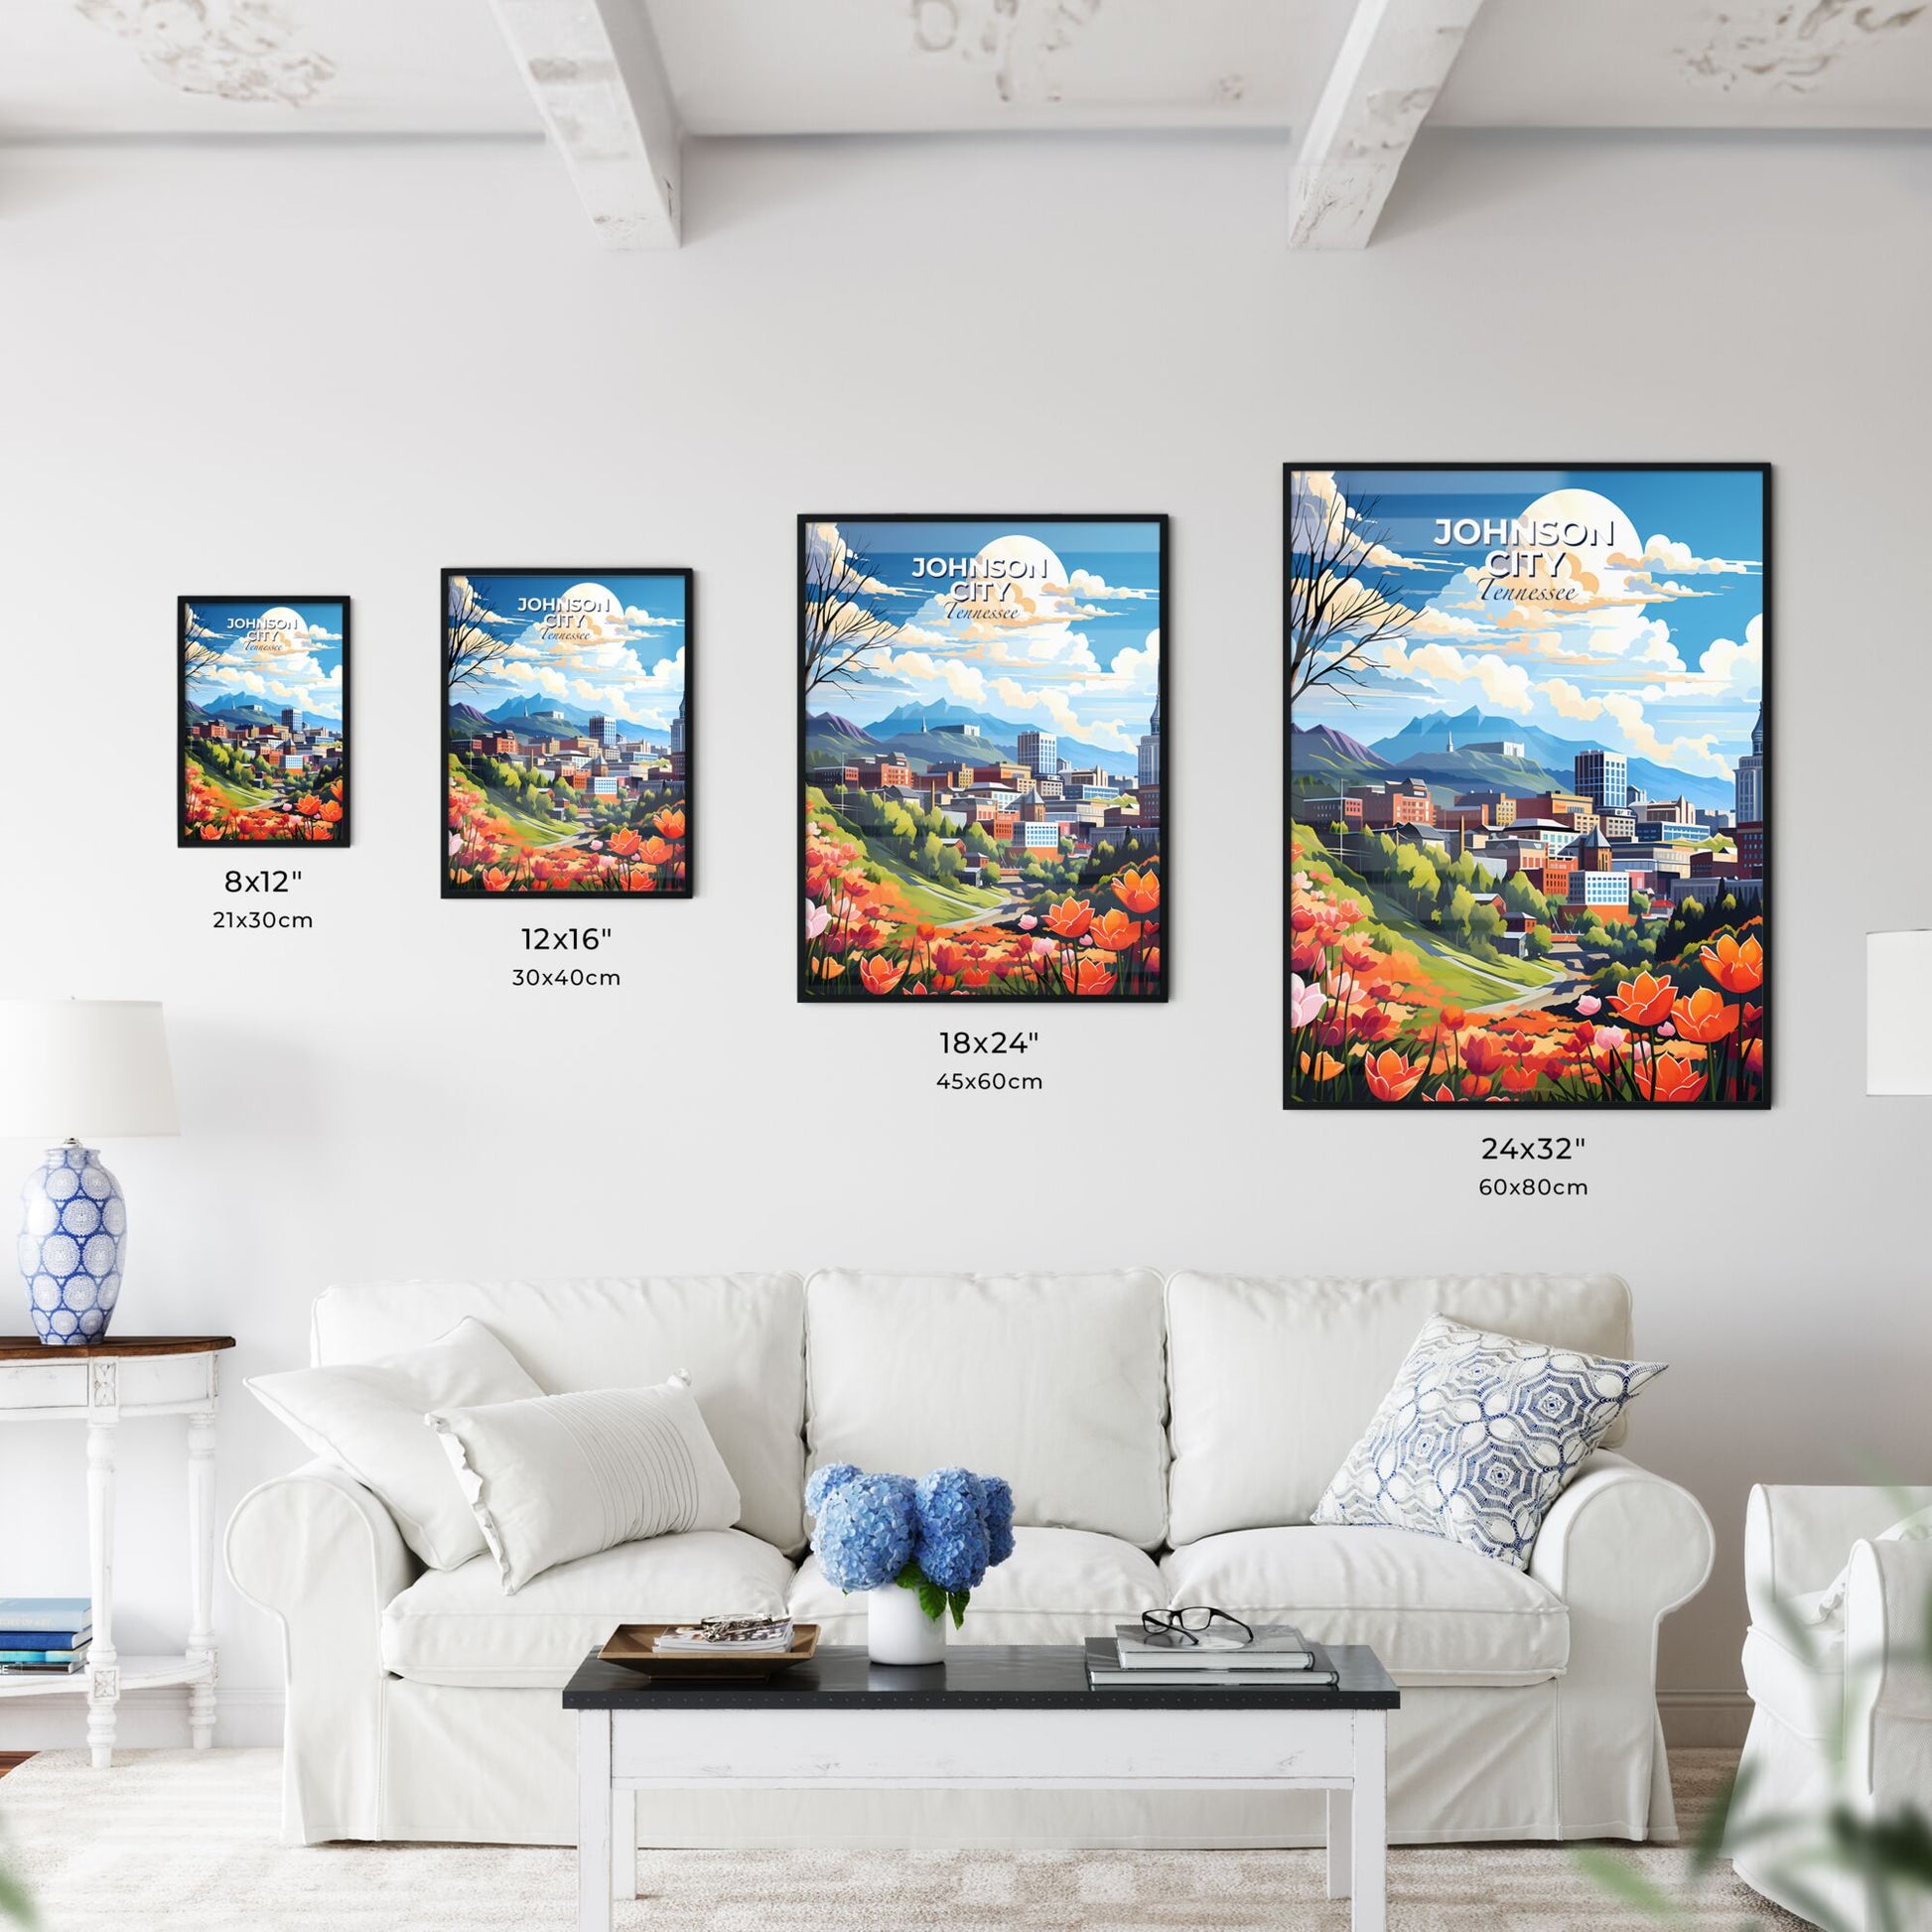 Johnson City, Tennessee, A Poster of a cityscape with flowers and mountains in the background Default Title